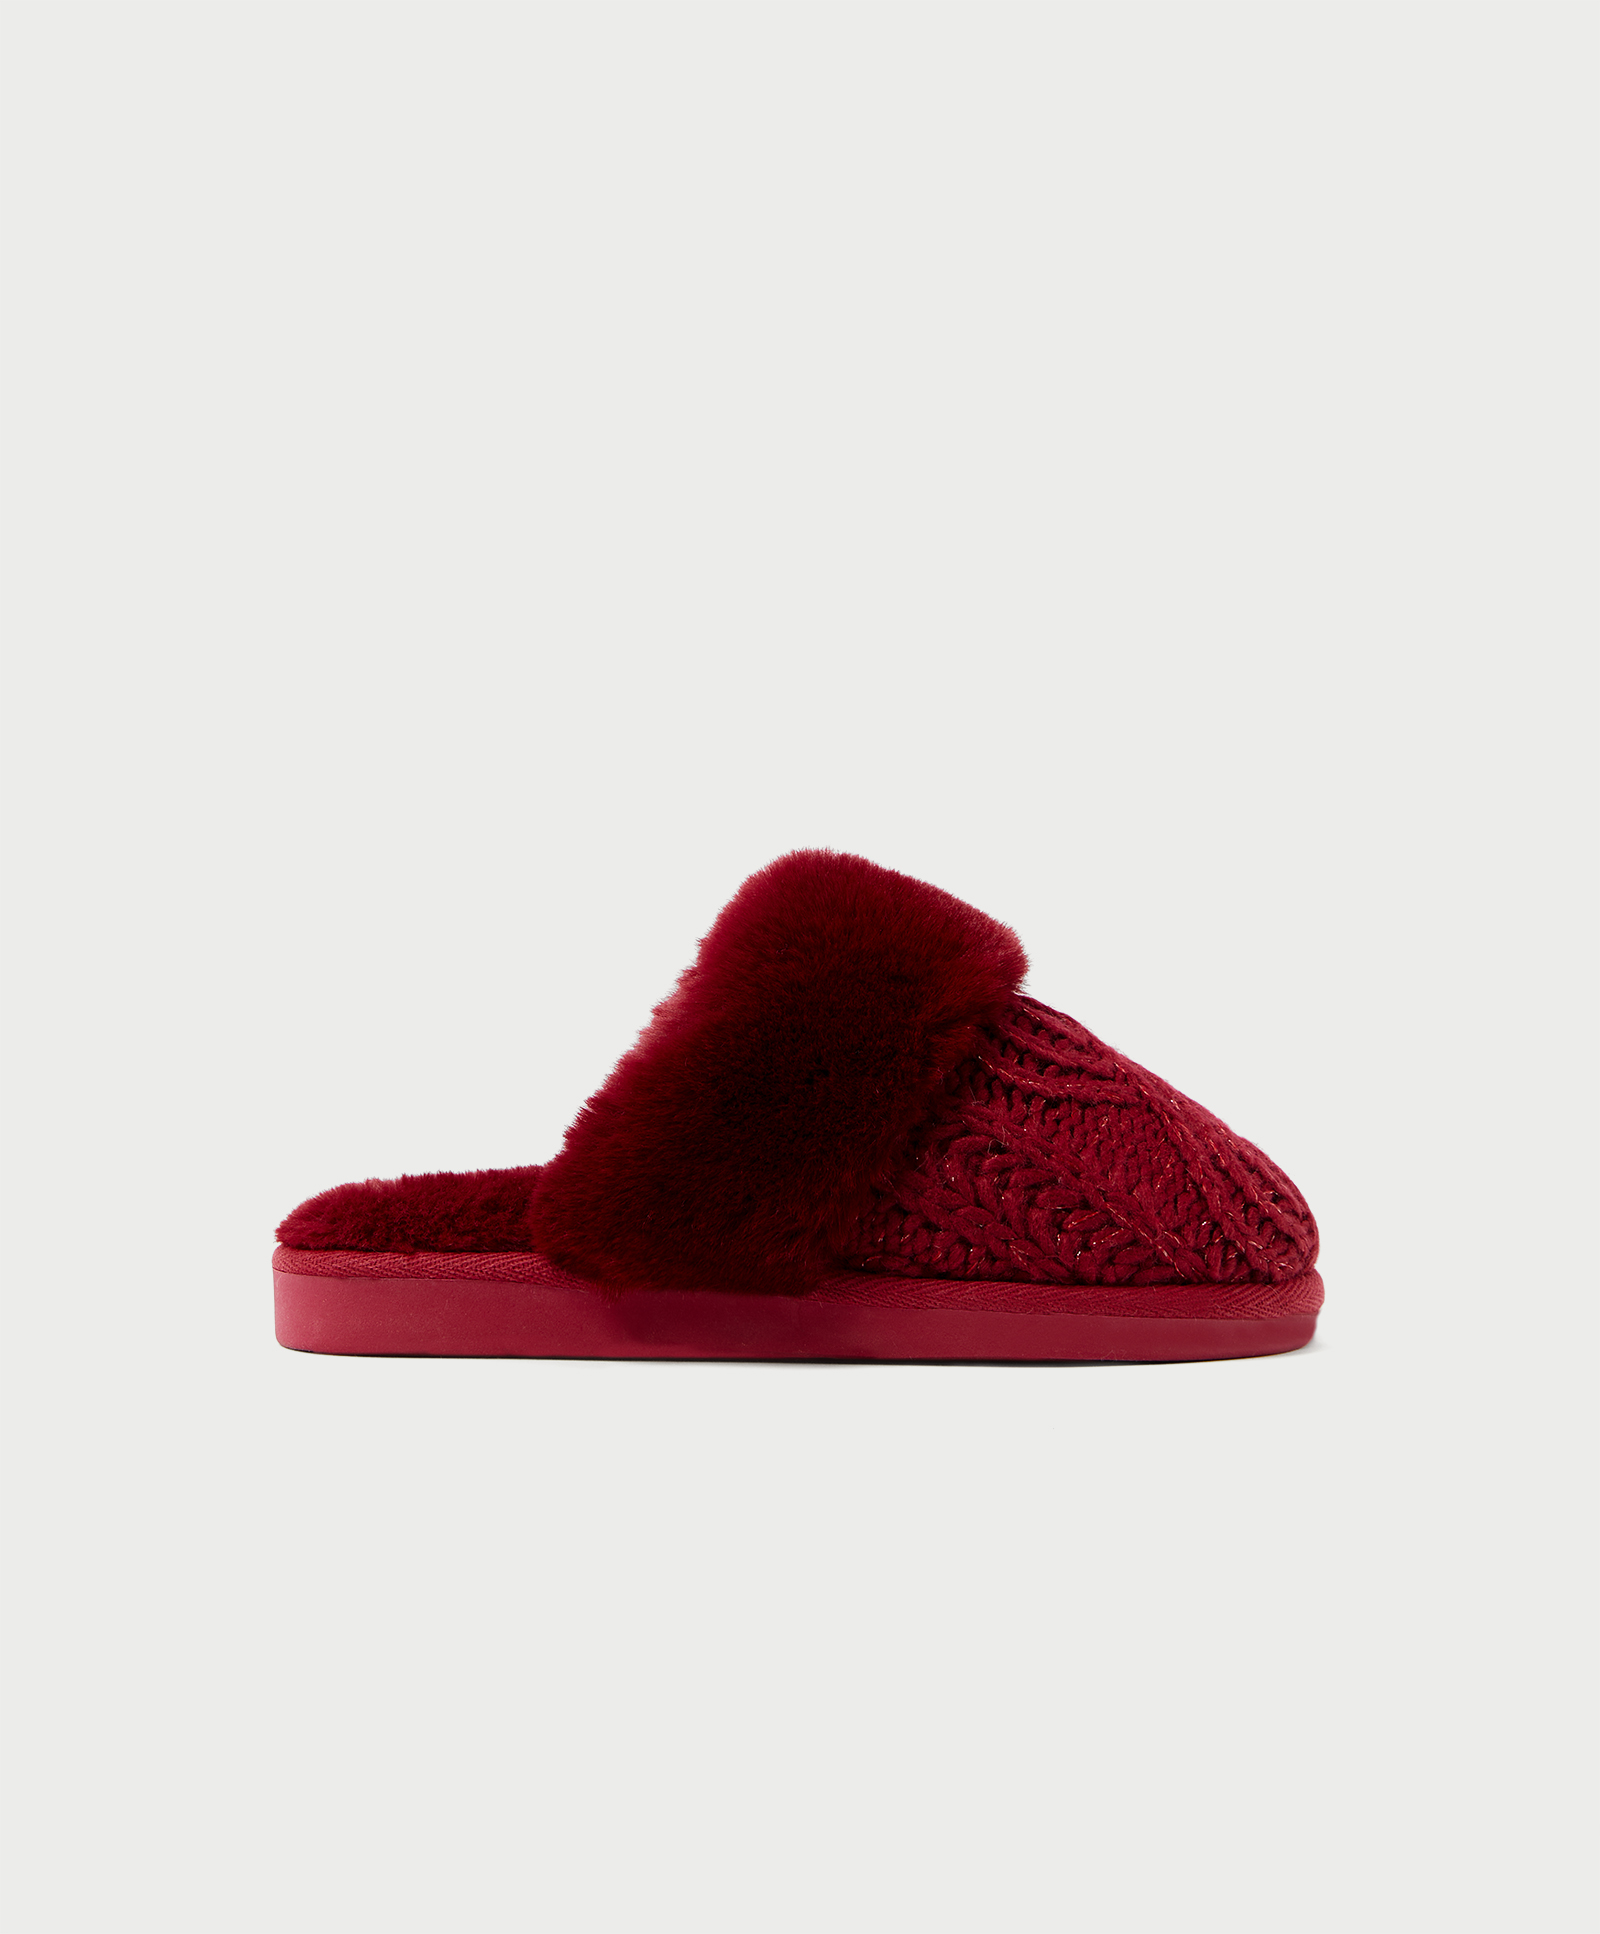 Knit slippers with furry cuff